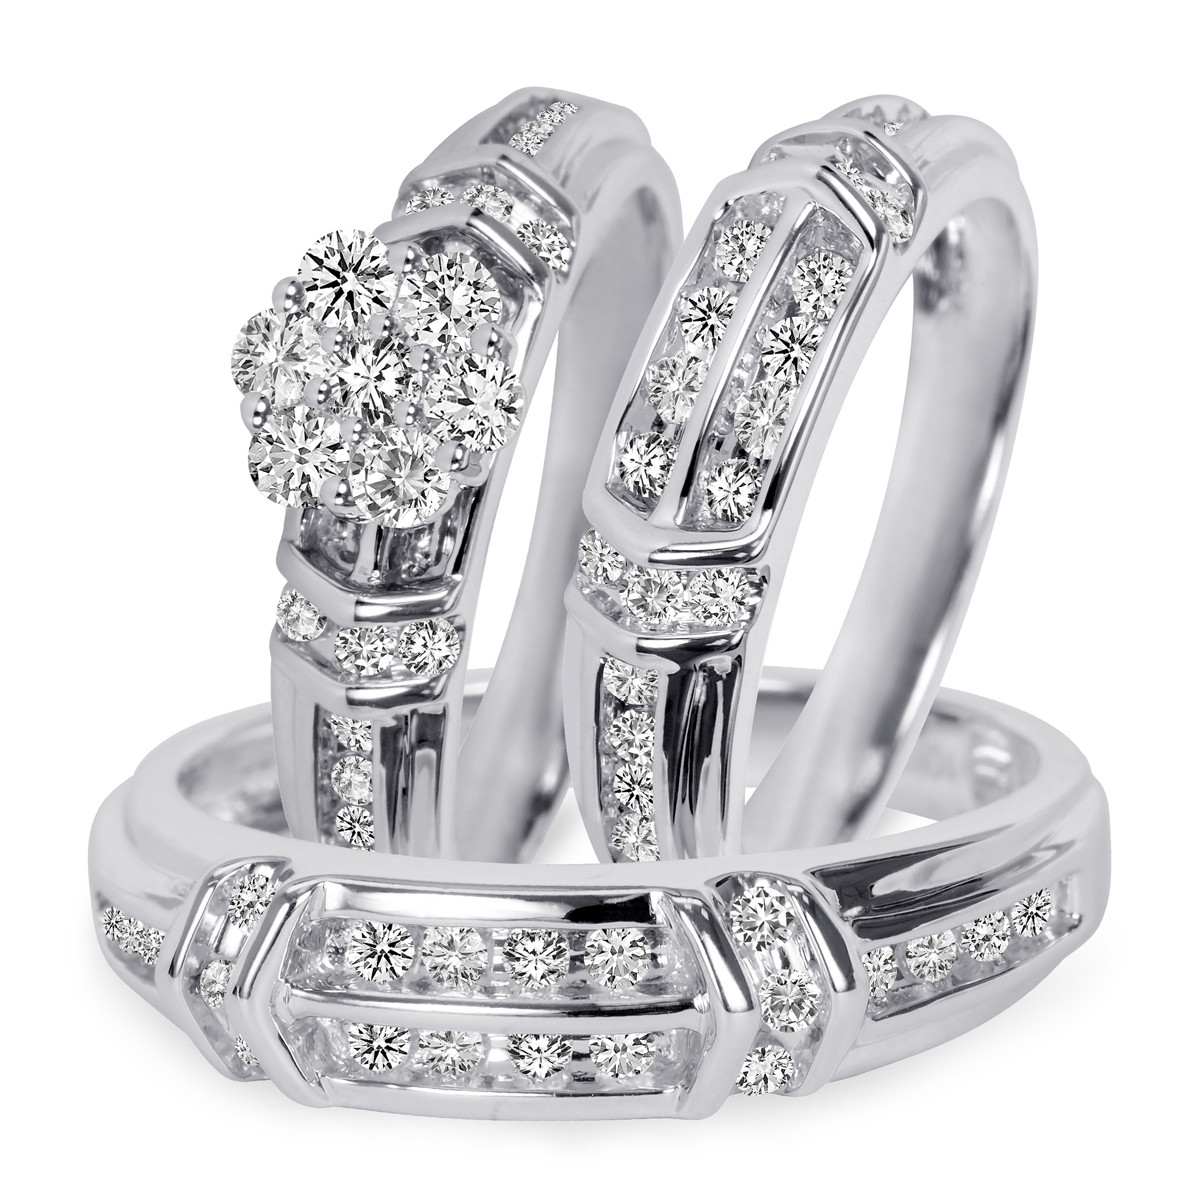 Wedding Ring Sets For Him And Her Cheap
 Awesome cheap his and hers wedding sets Matvuk